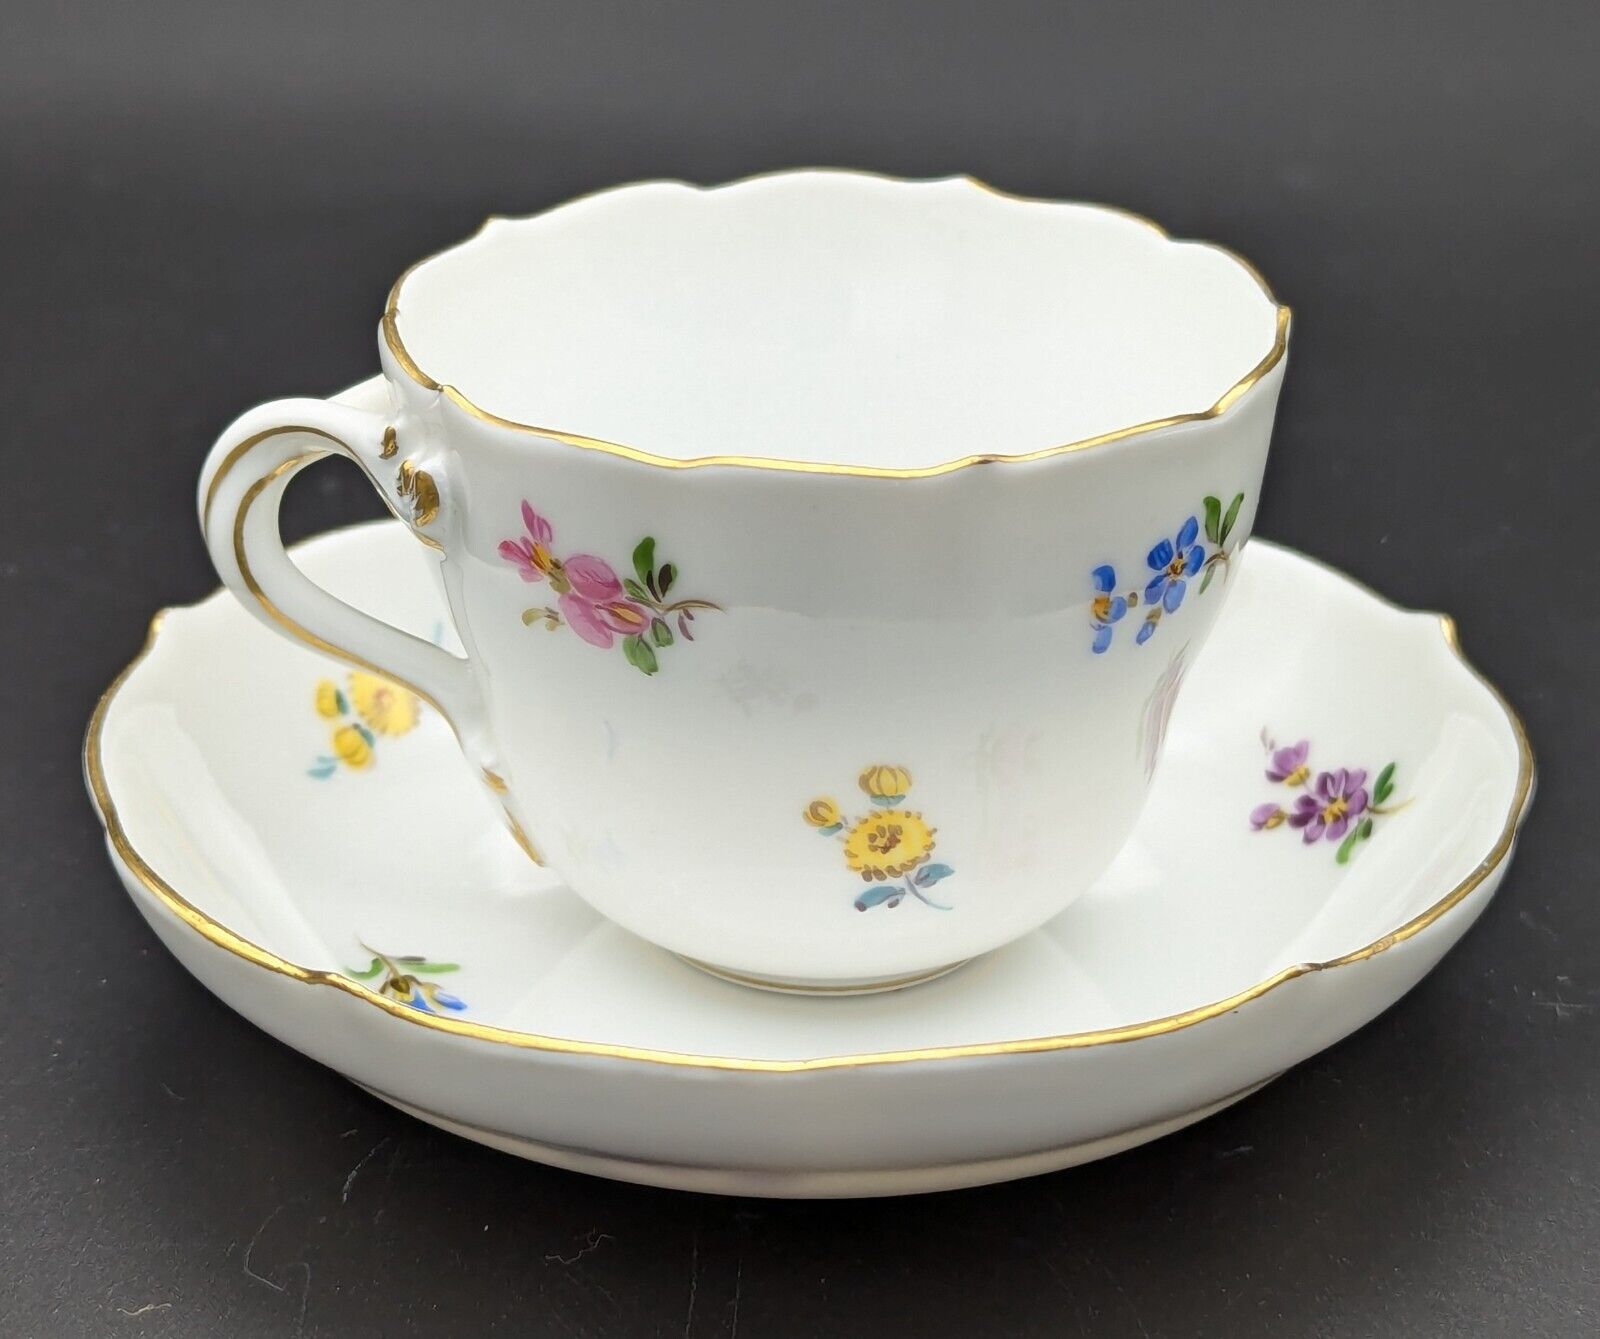 Vintage Meissen Demitasse Tea Cup and Saucer Hand Painted Floral 1950s